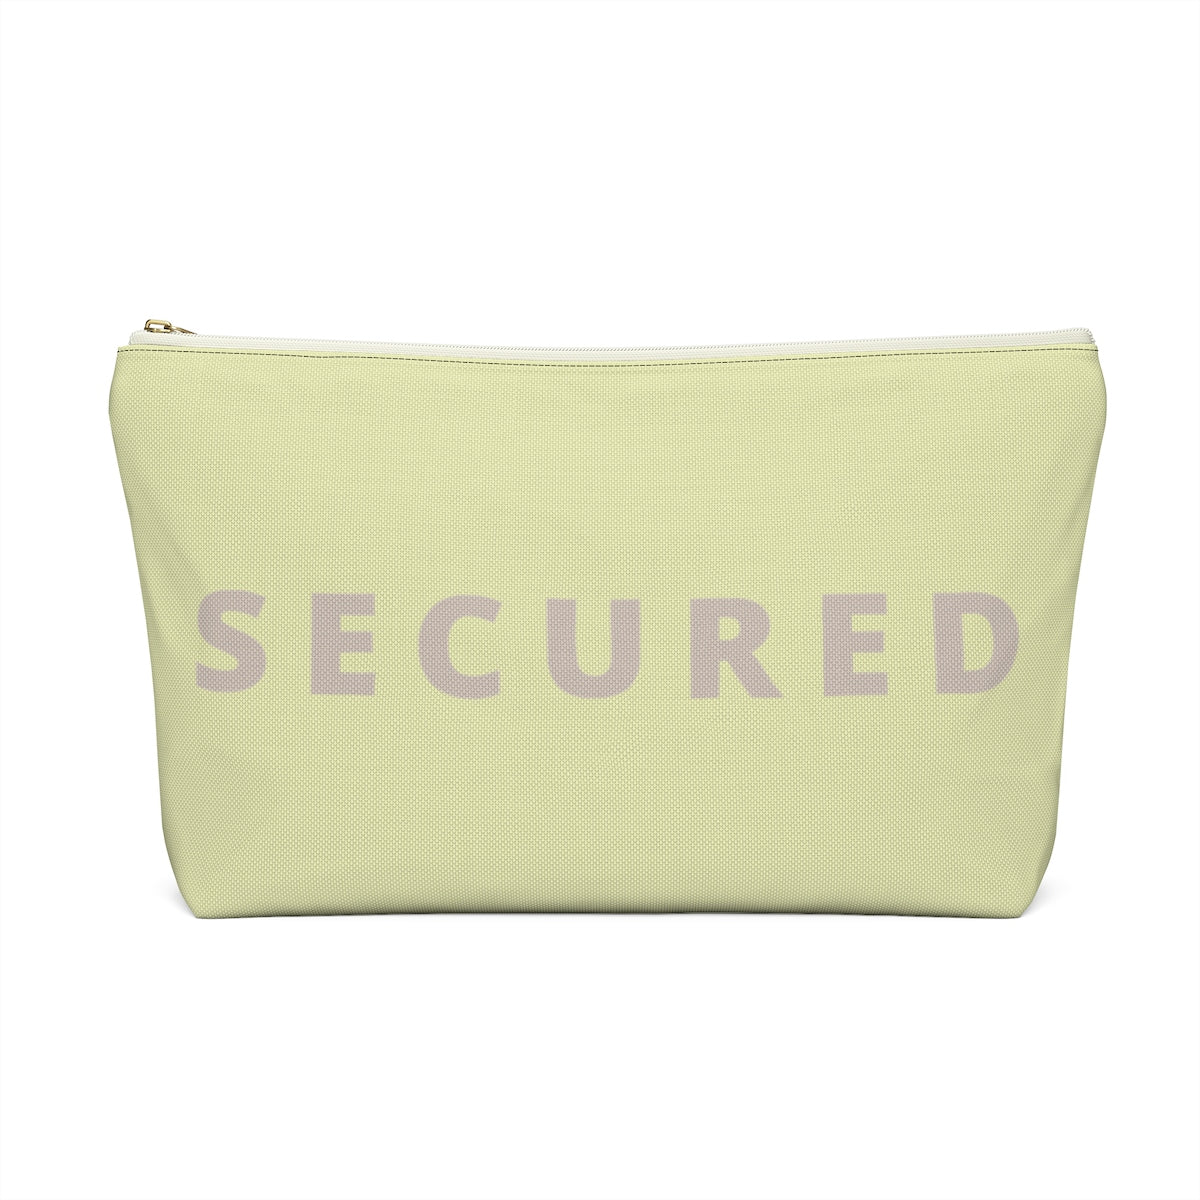 Secure The Bag (Beige Pouch)